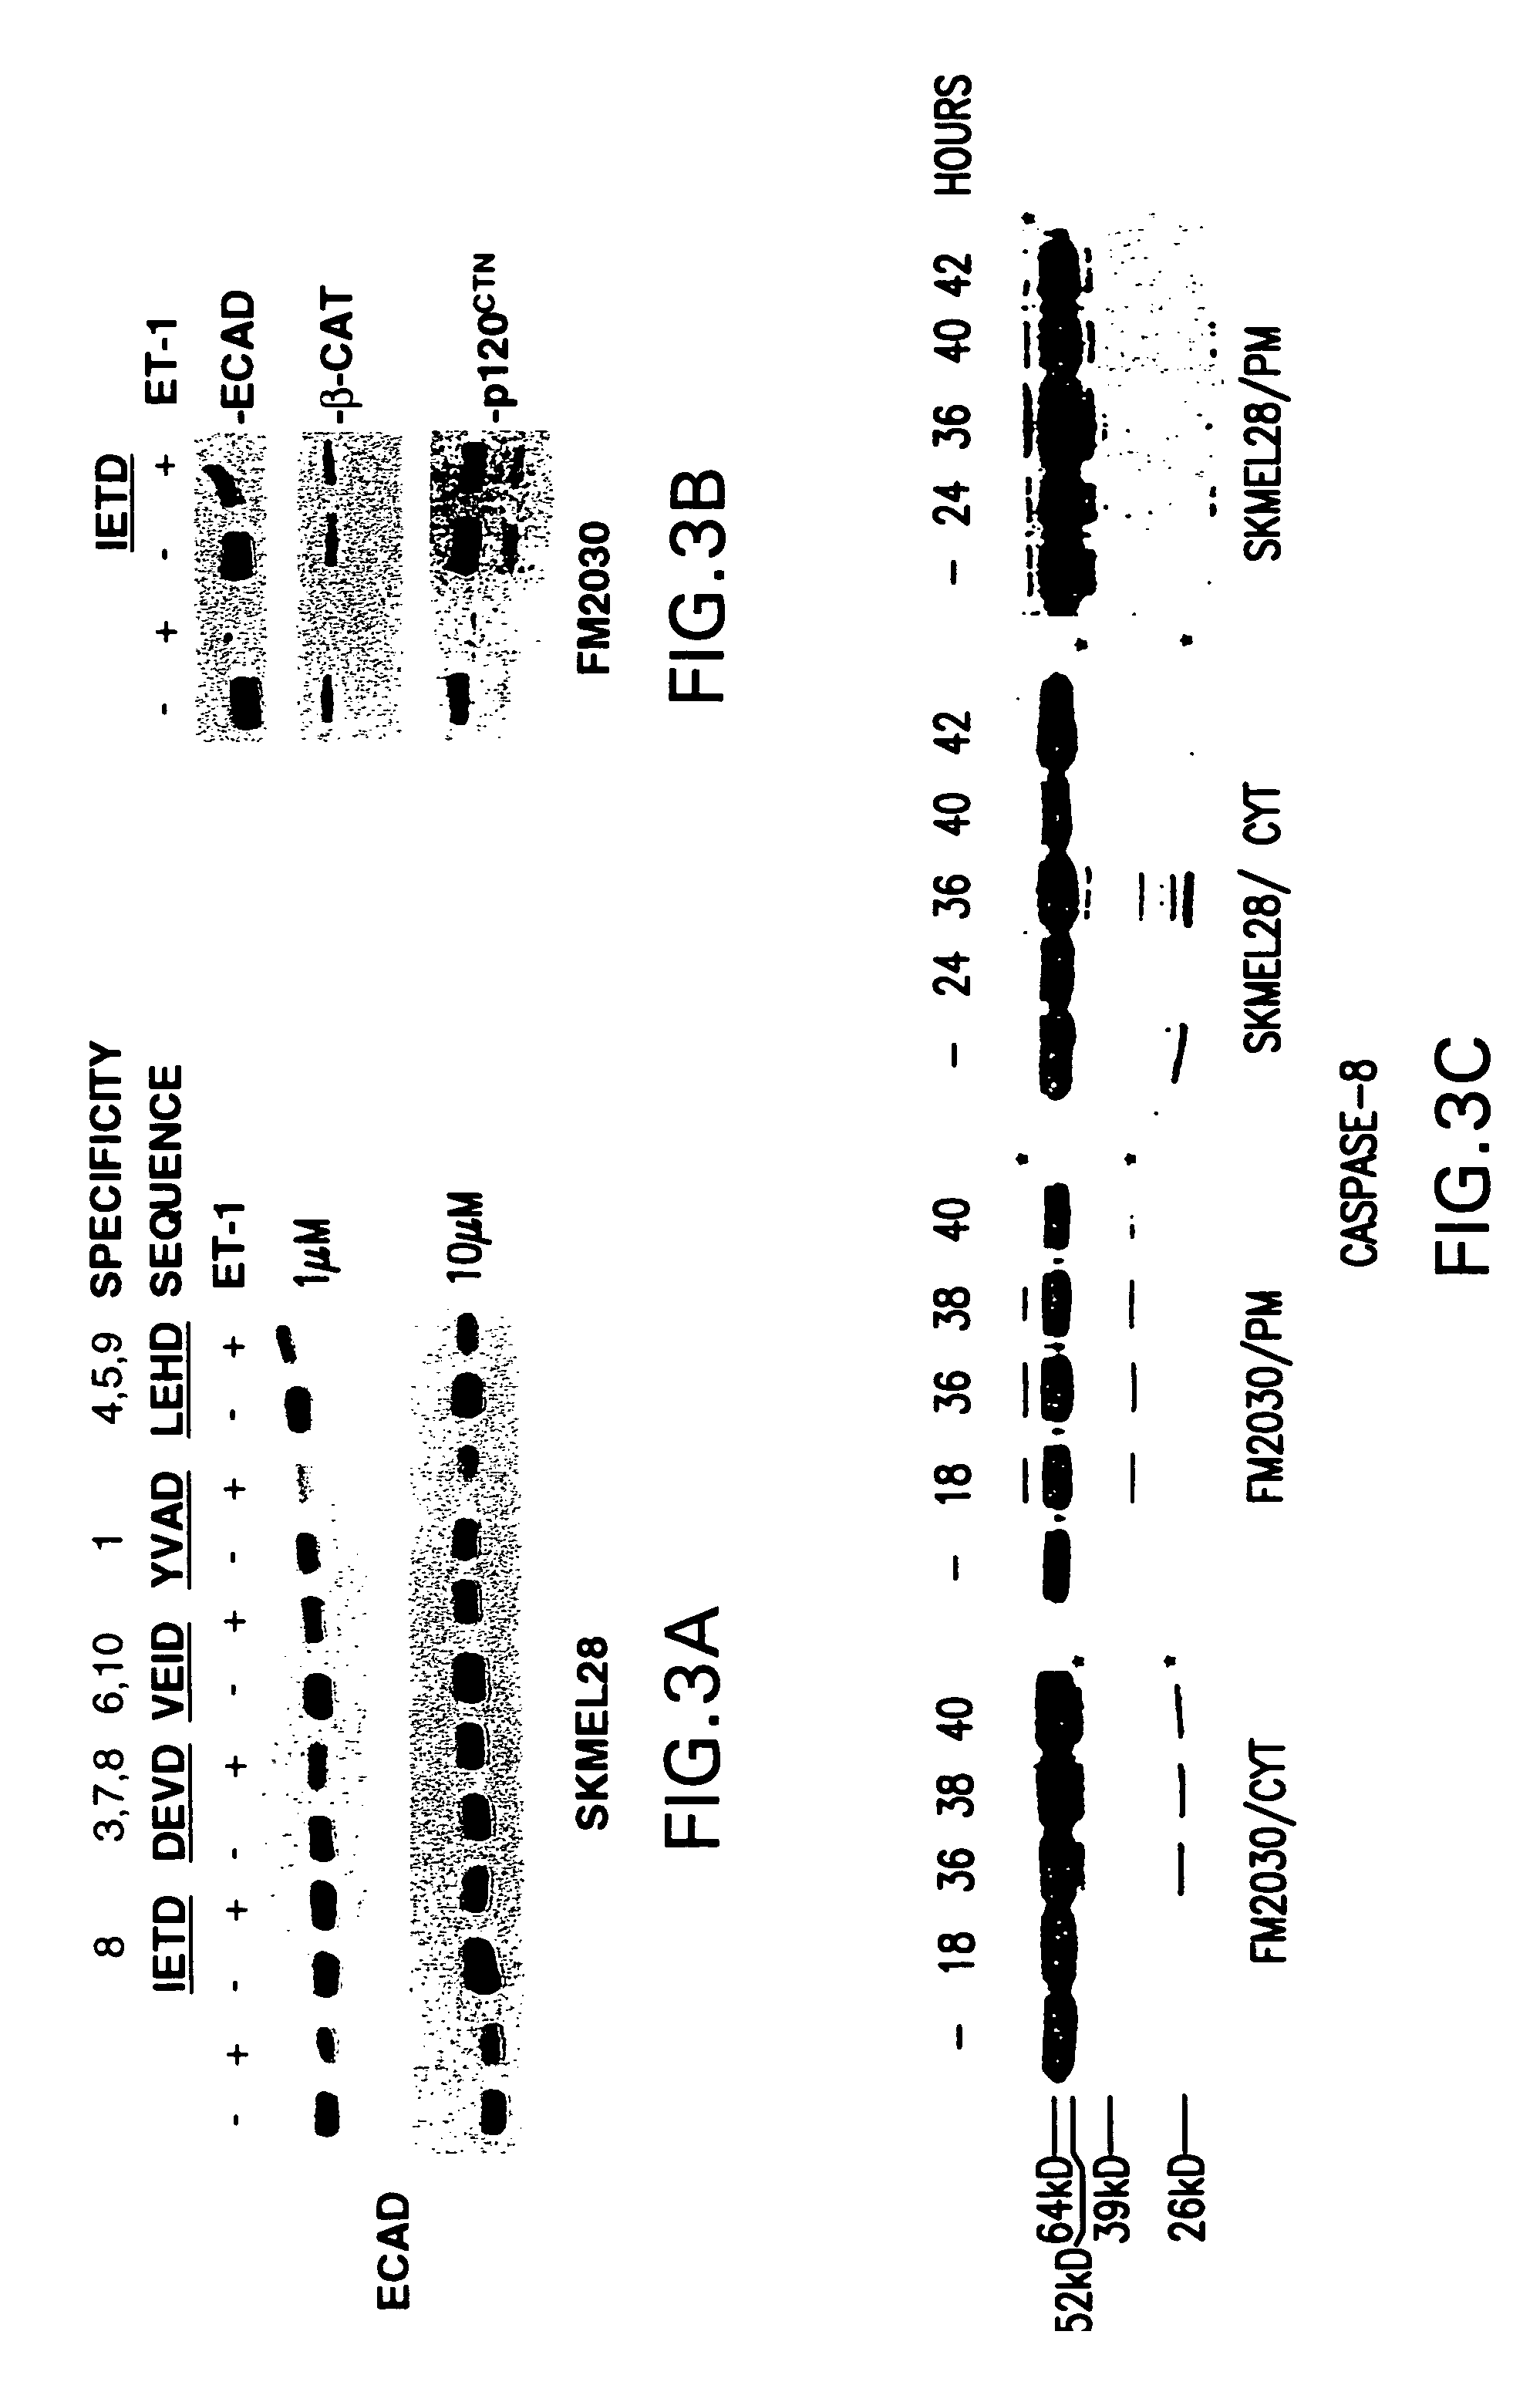 Cancer treatment with endothelin receptor antagonists